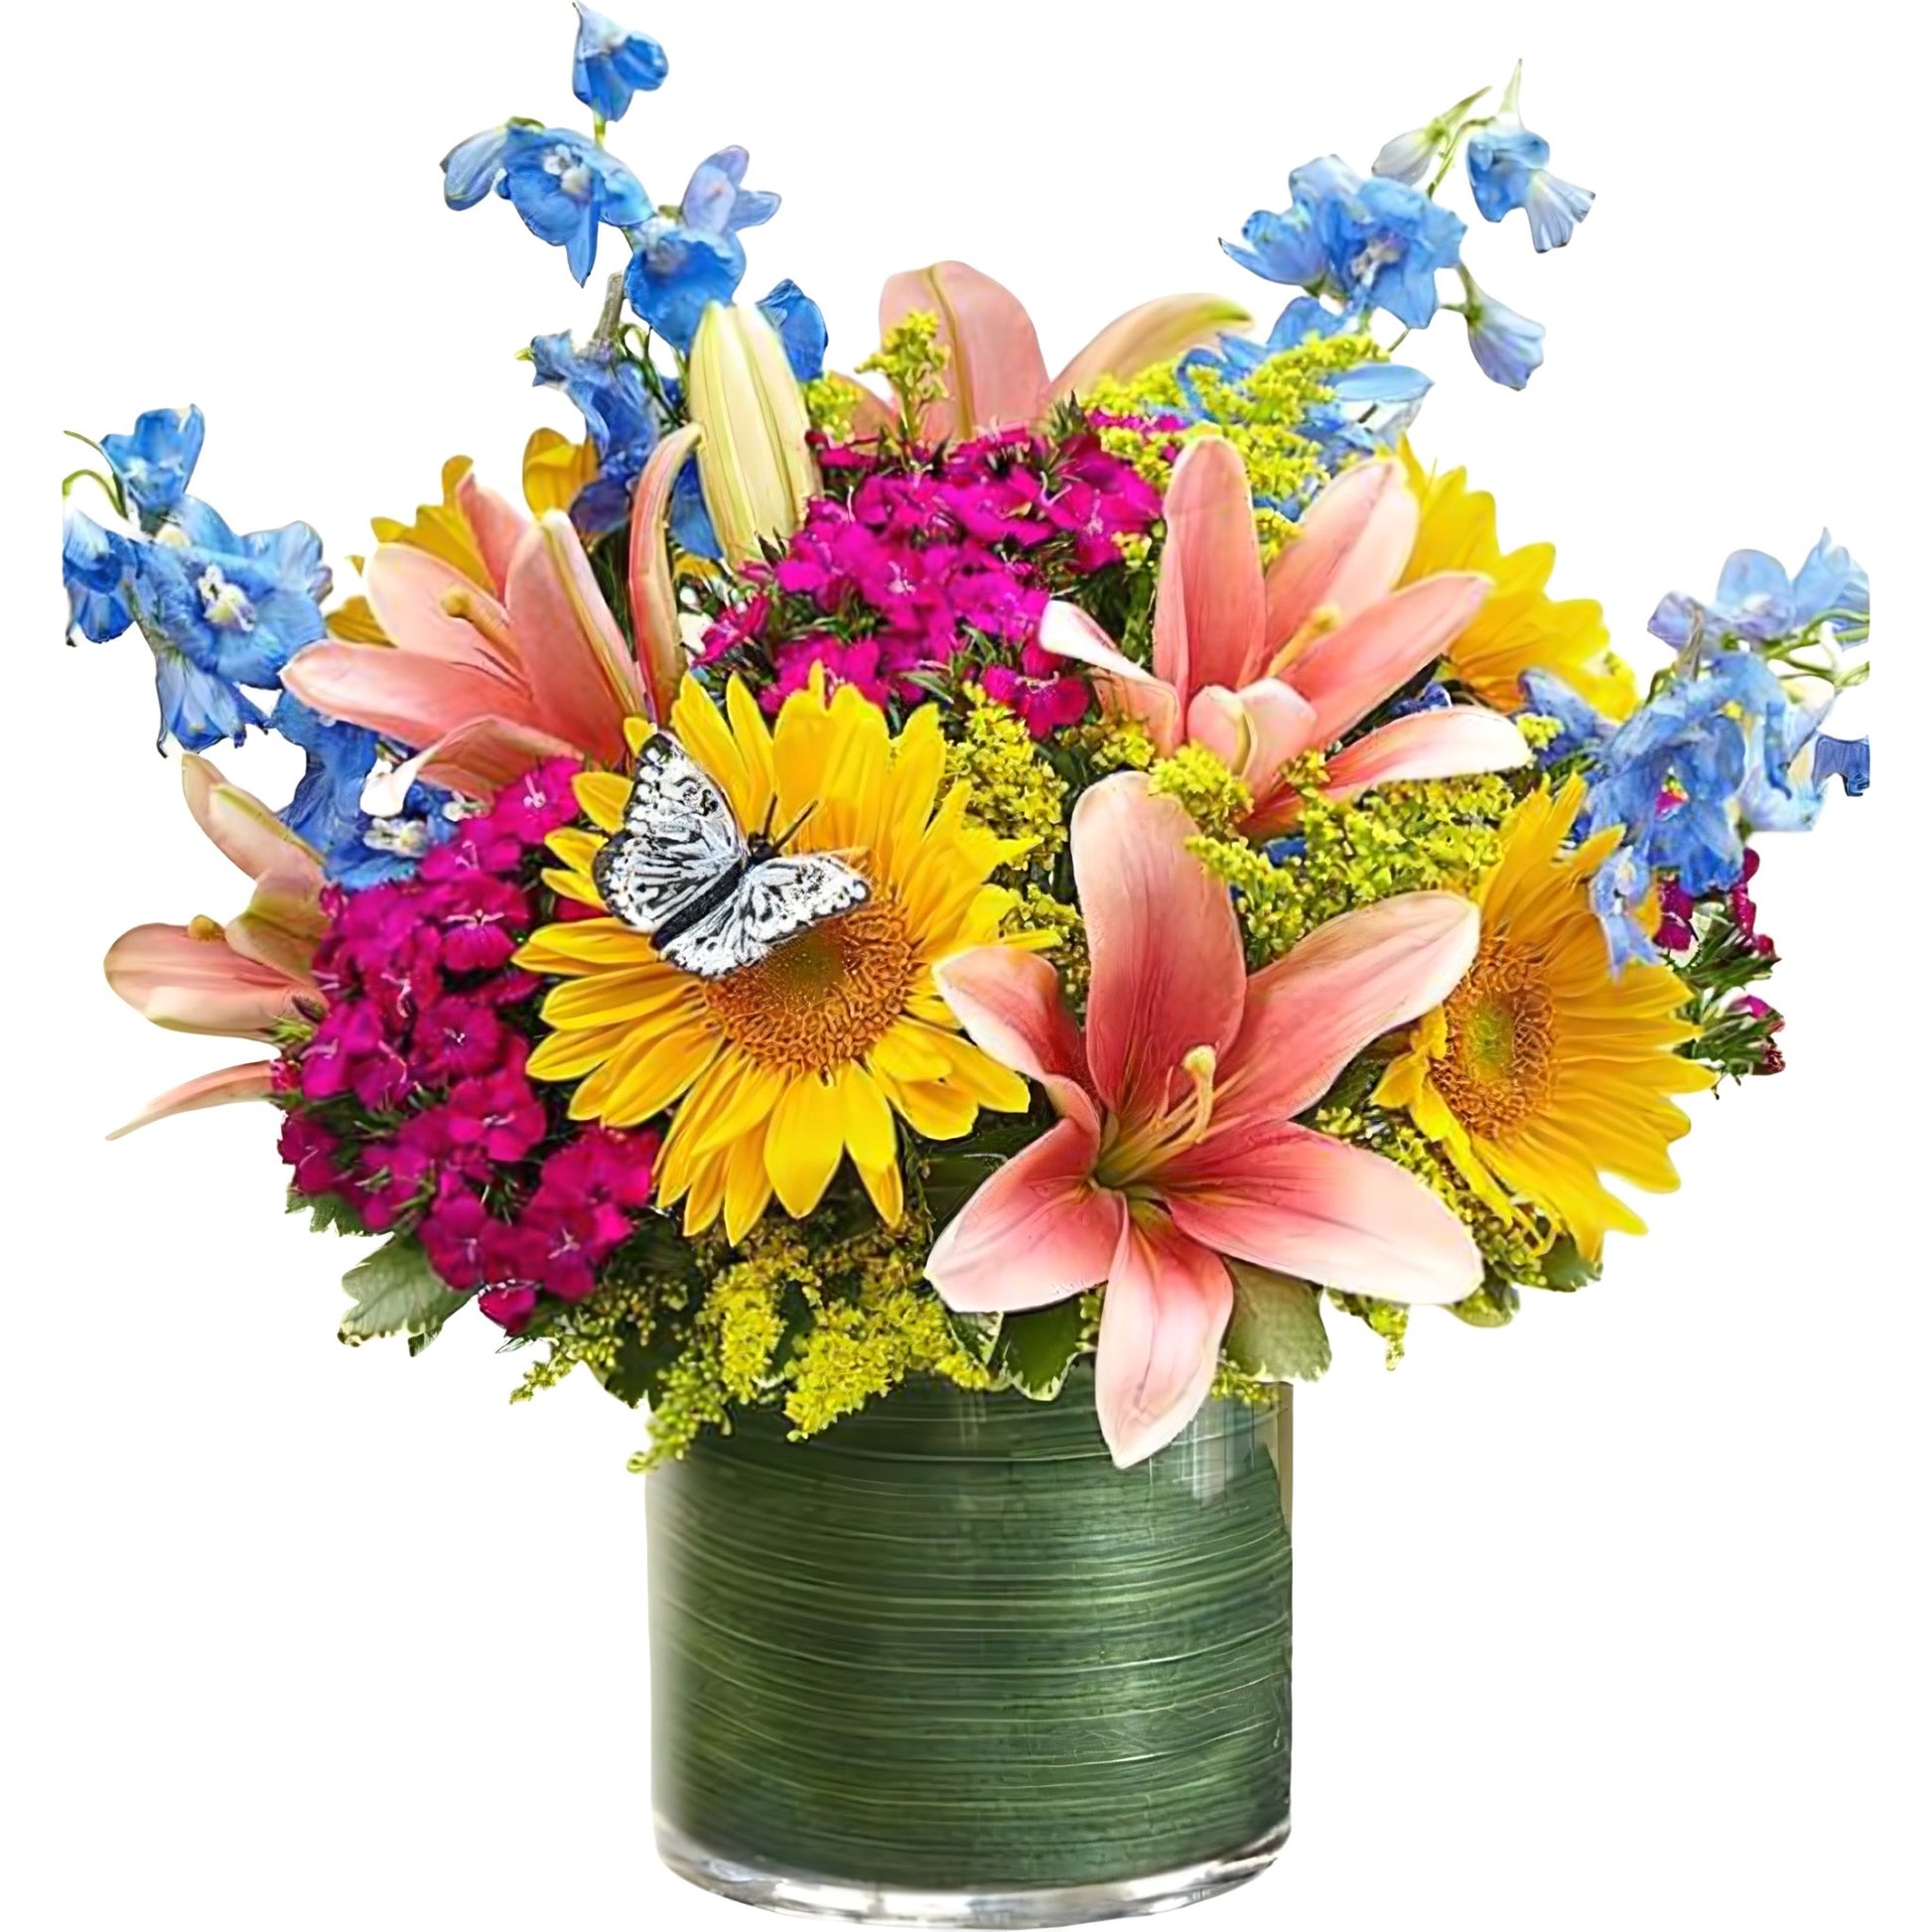 Simply Sophisticated - Floral Arrangement - Flower Delivery Brooklyn